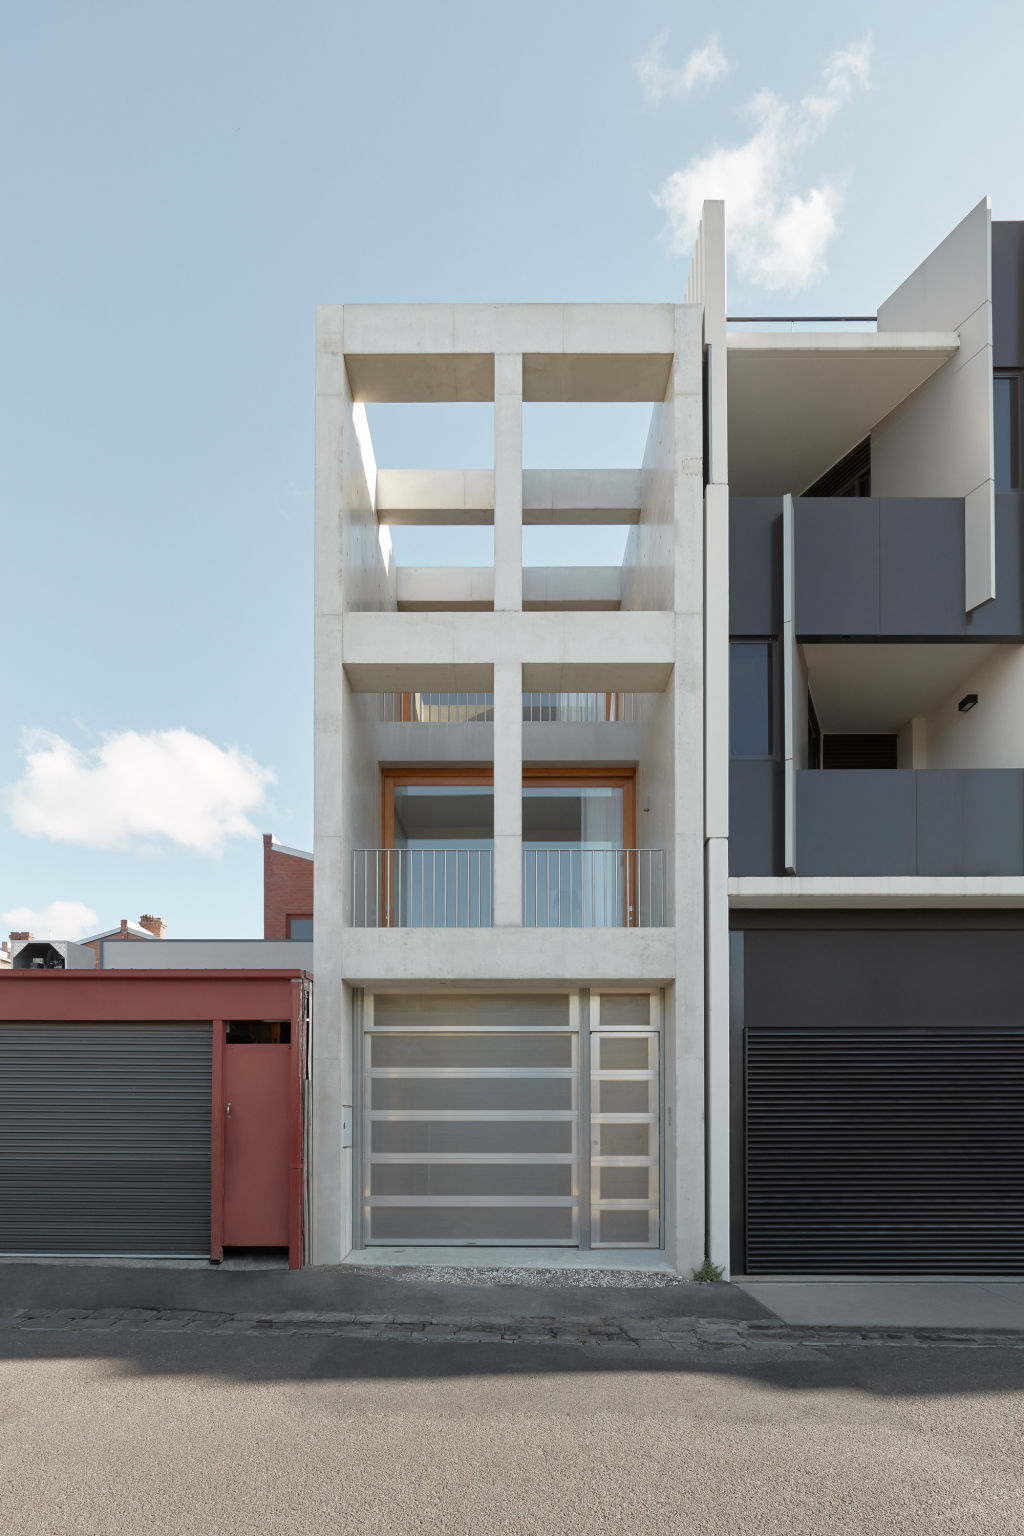 The home's on-site parking is certainly an achievement for an alleyway home. Photo: Tom Ross